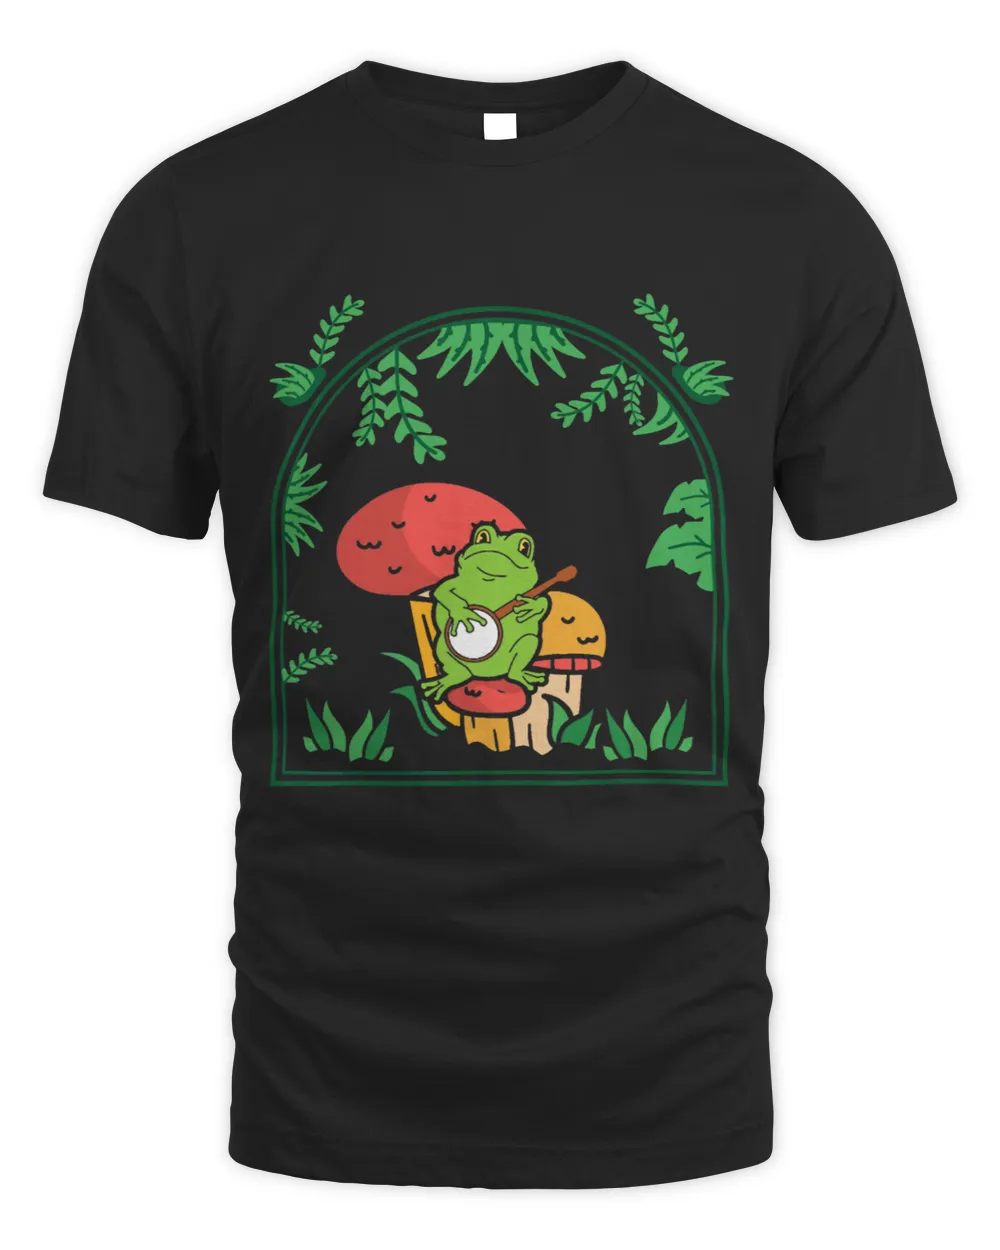 Frogs Cute Cottagecore Aesthetic Frog Playing Banjo on Mushroom63 10